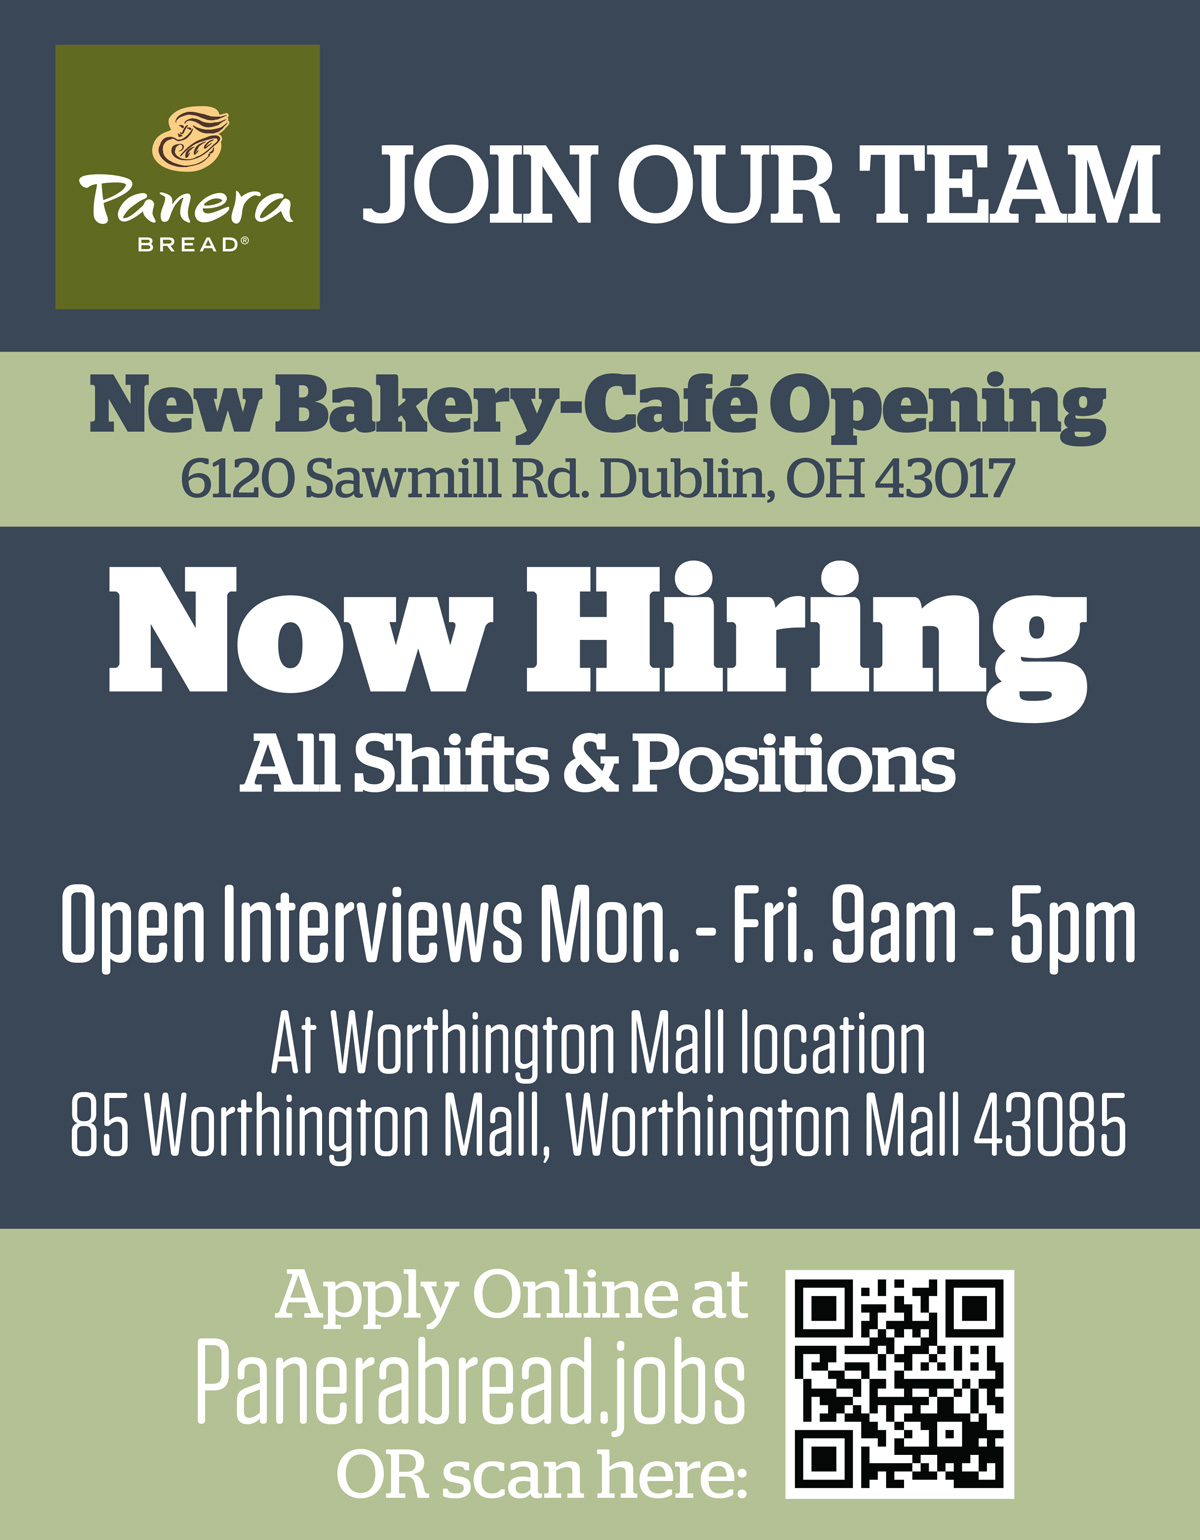 Join Our Team at 6120 Sawmll Rd., Dublin, OH 43017